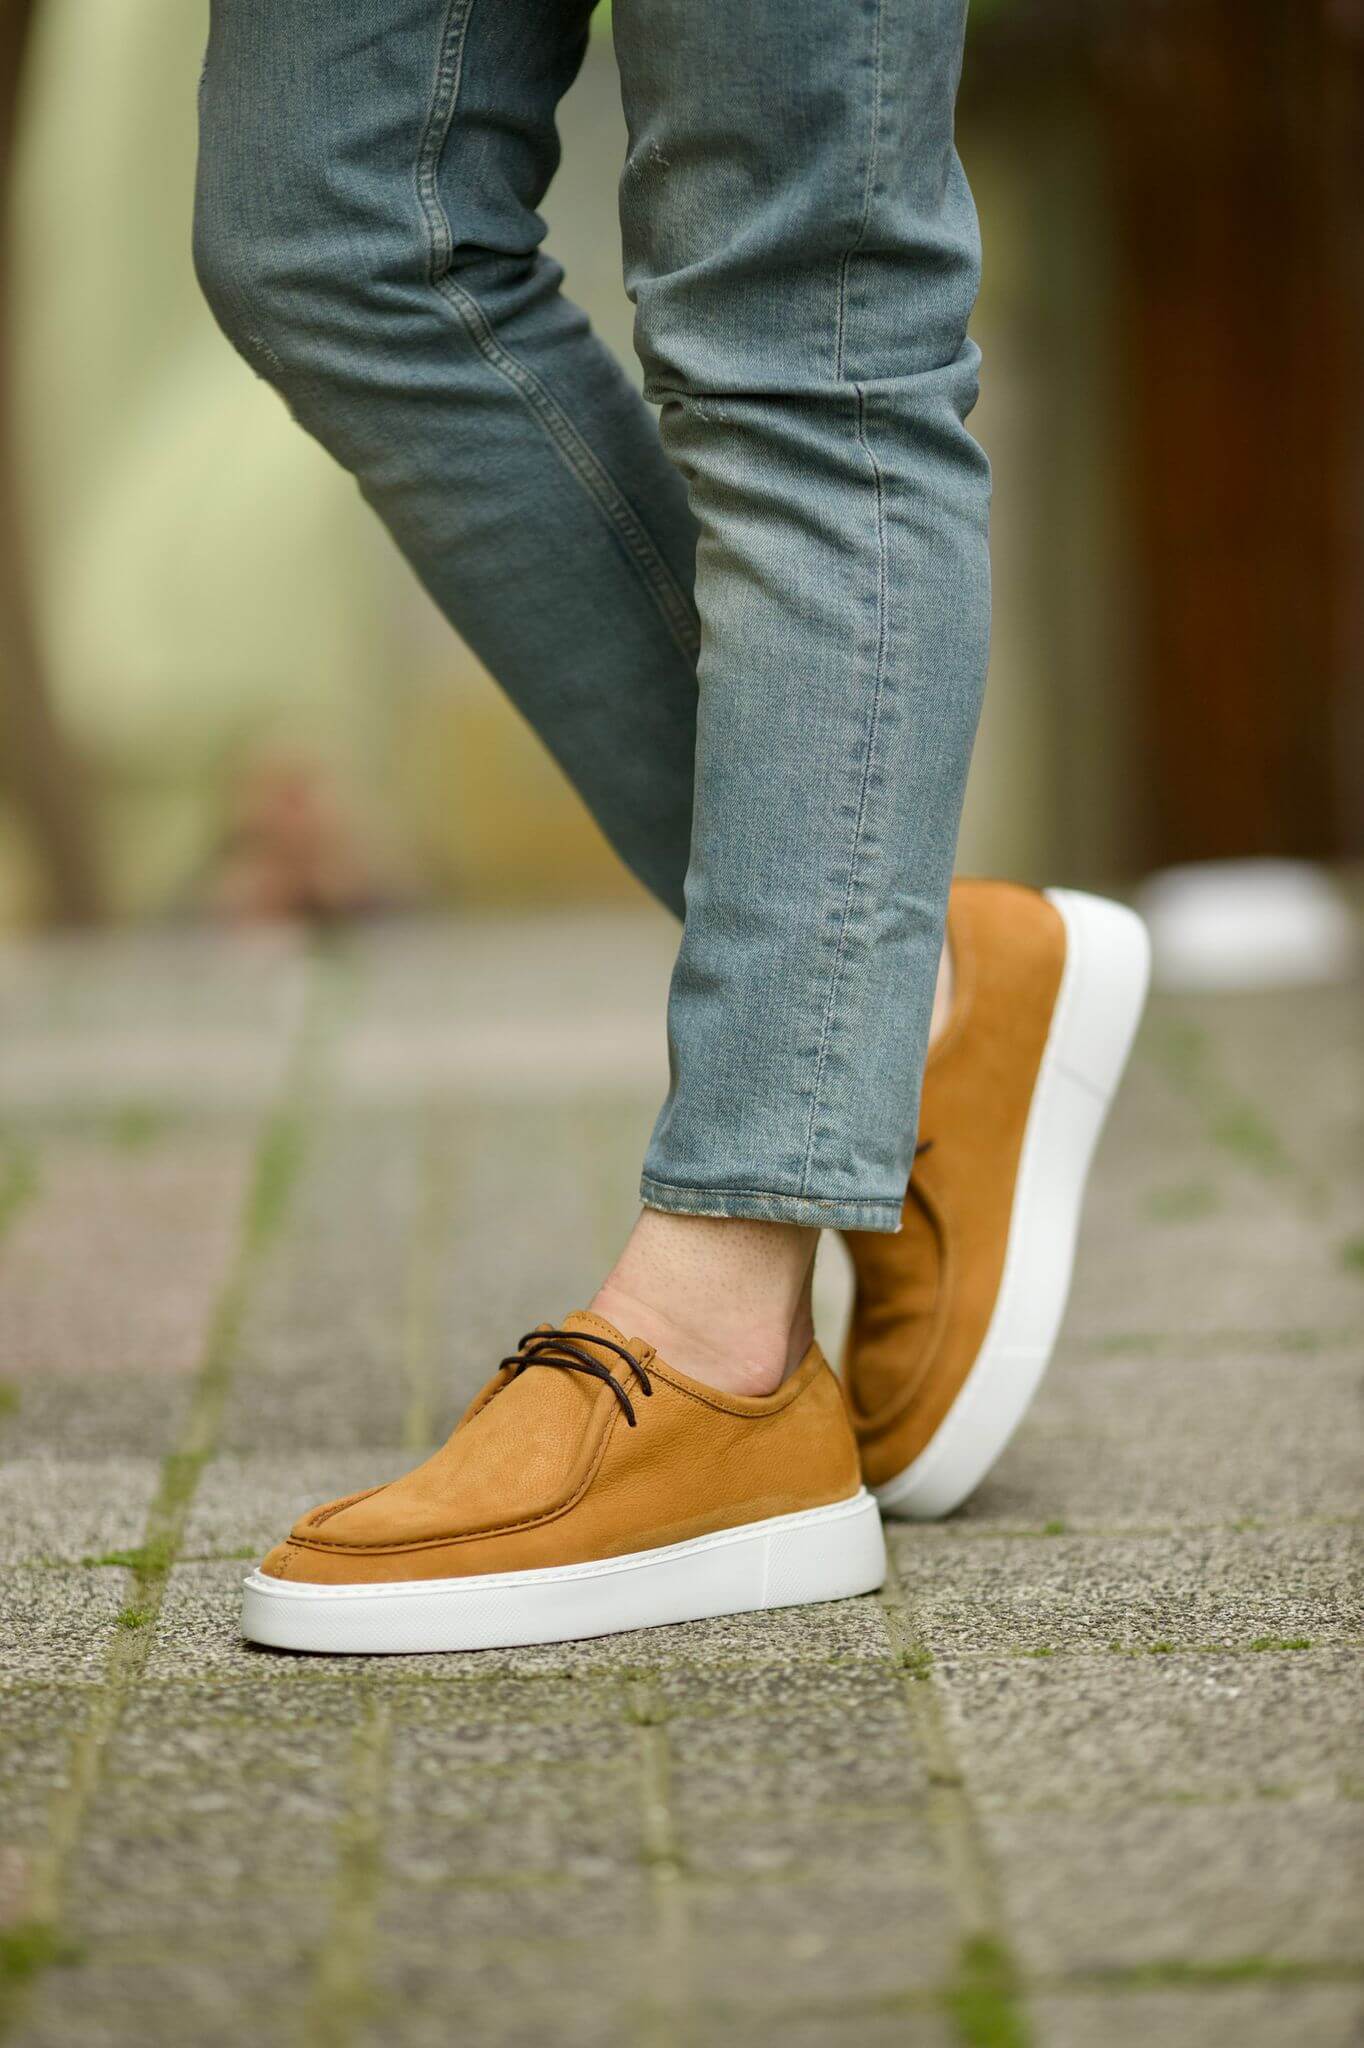 A Camel Casual Lace Up shoe on display.